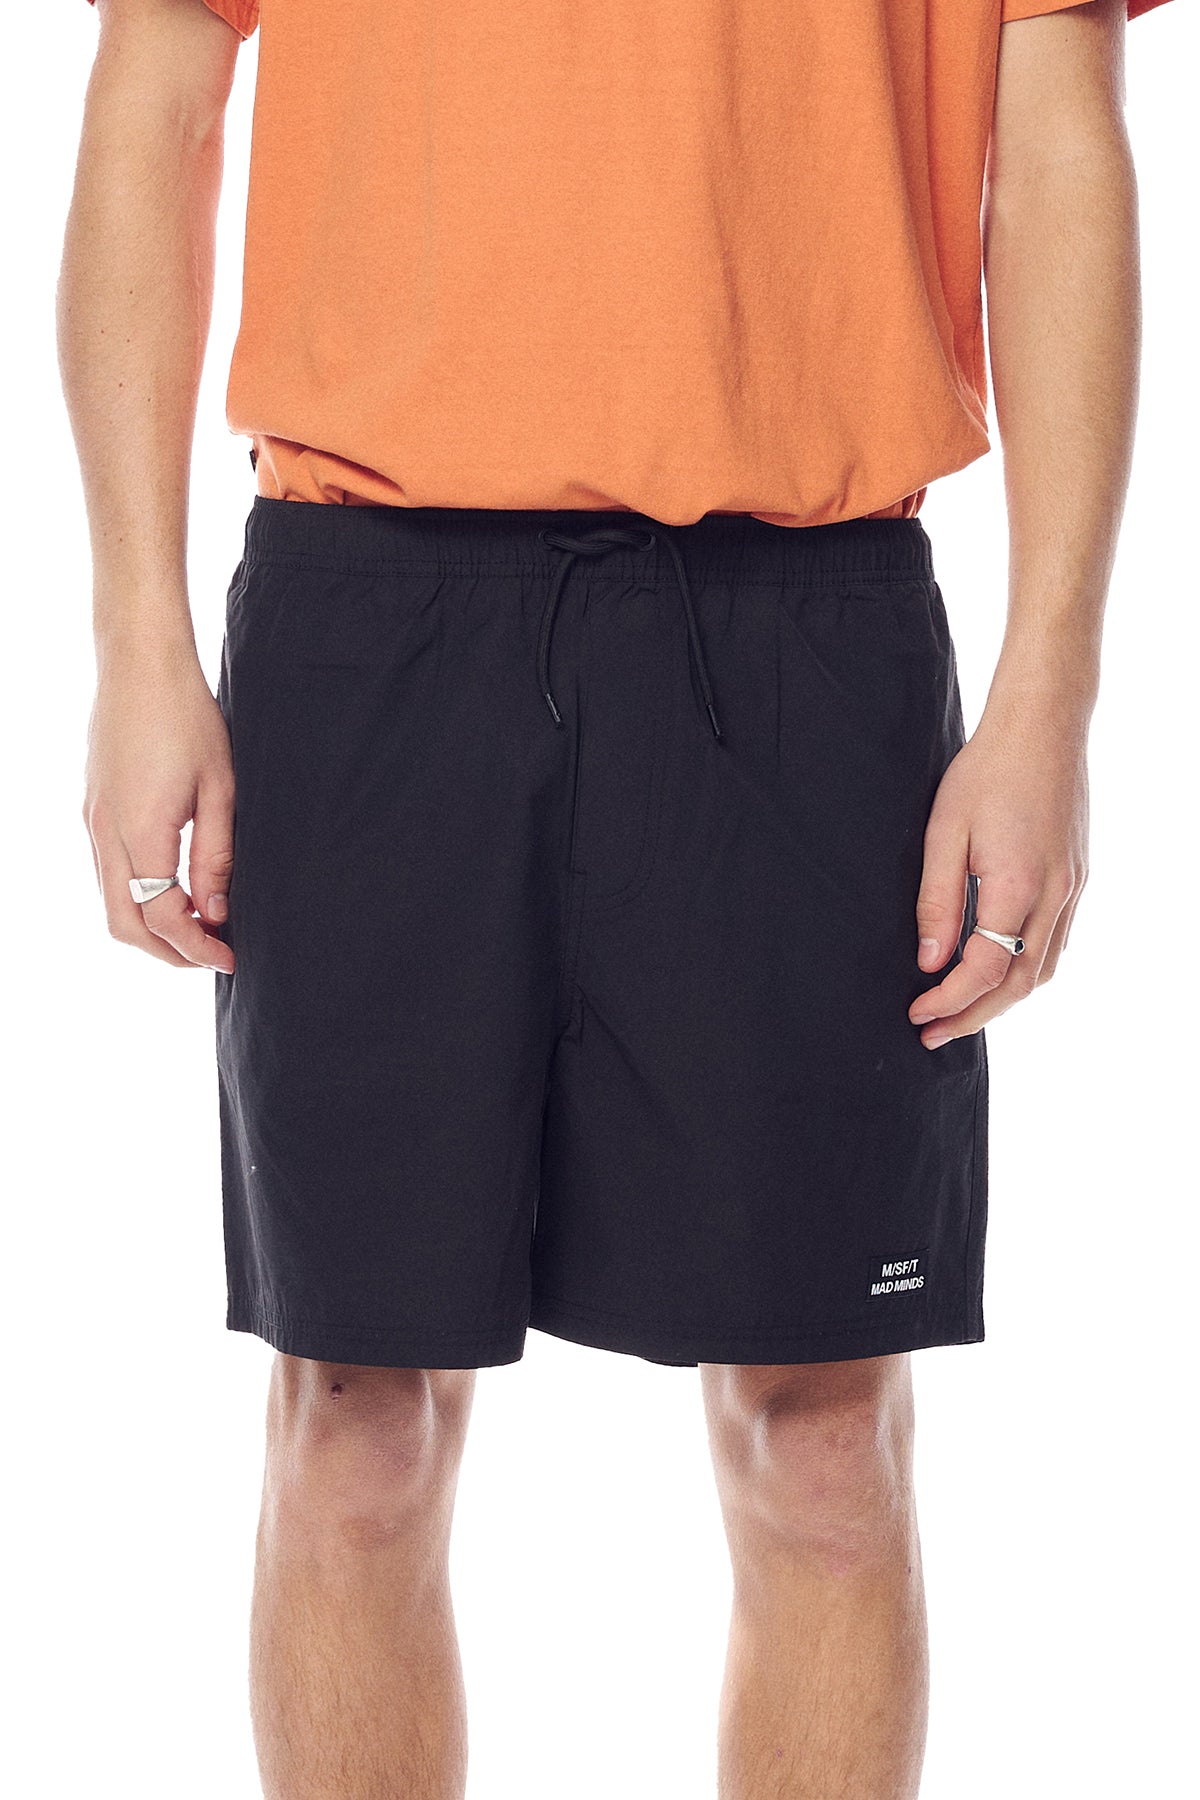 RECYCLED POWER SHORT - Black